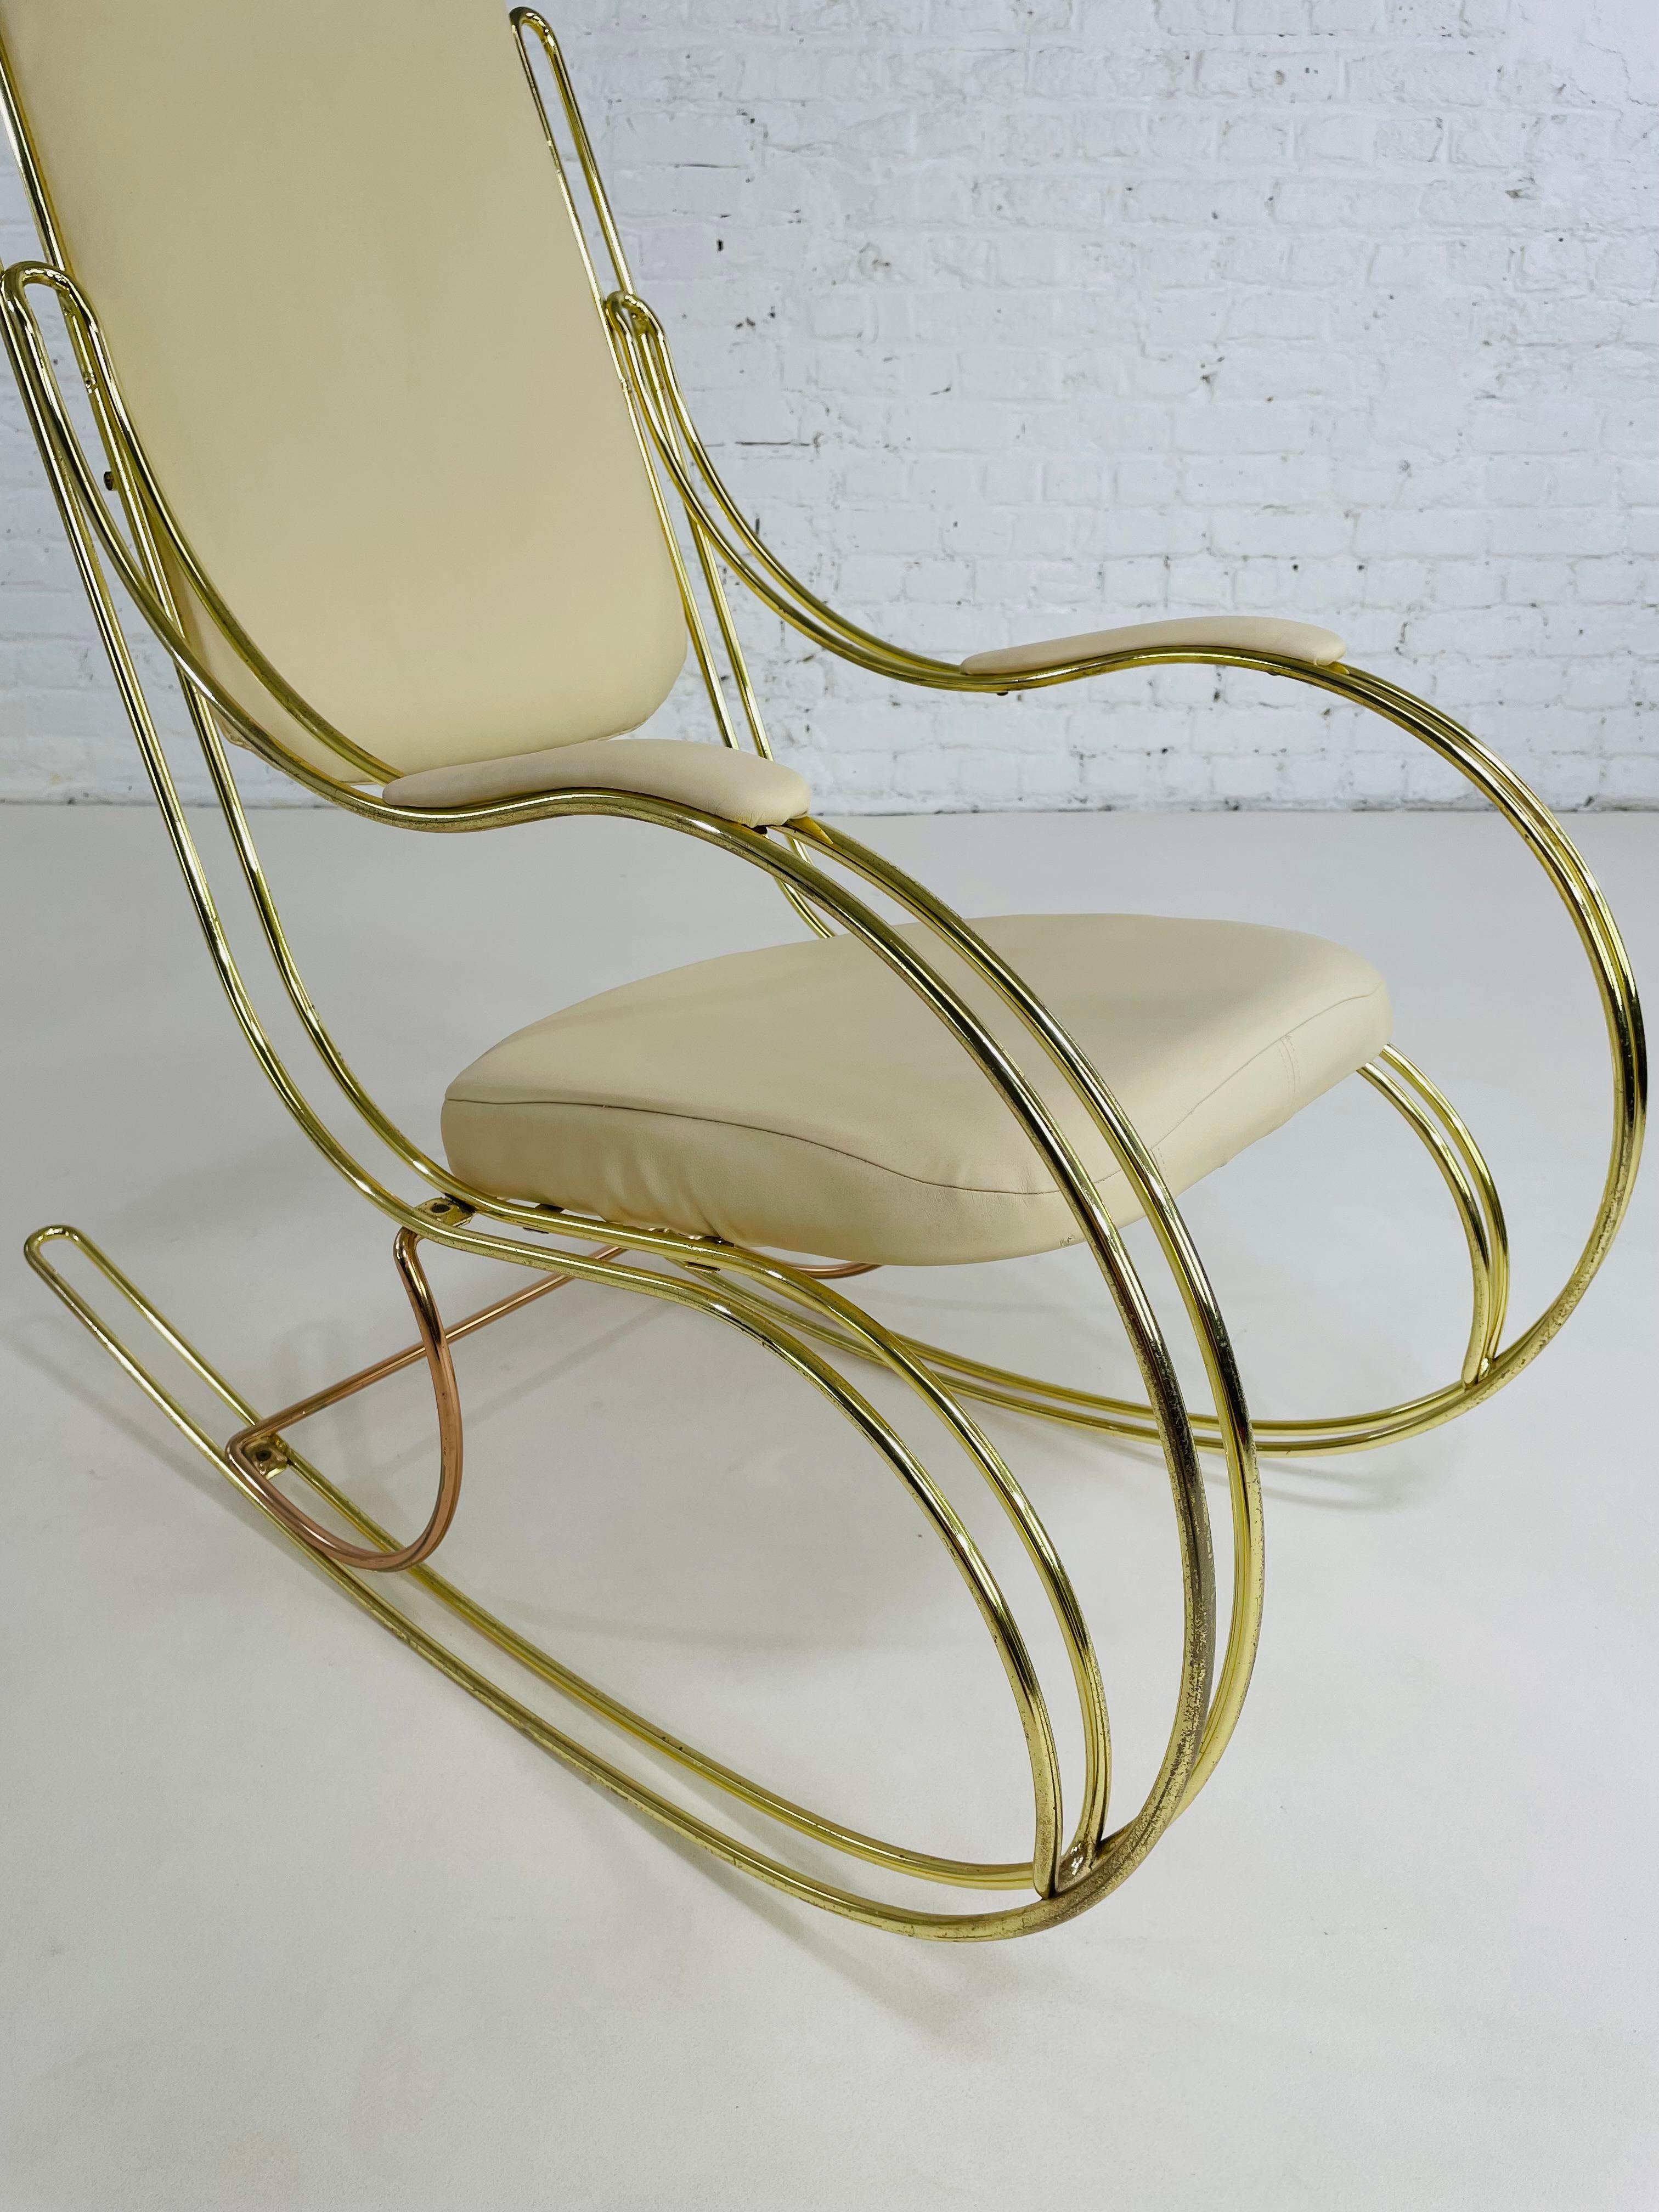 20th Century 1960s-1970s Brass And Beige Faux Leather Rocking Chair For Sale